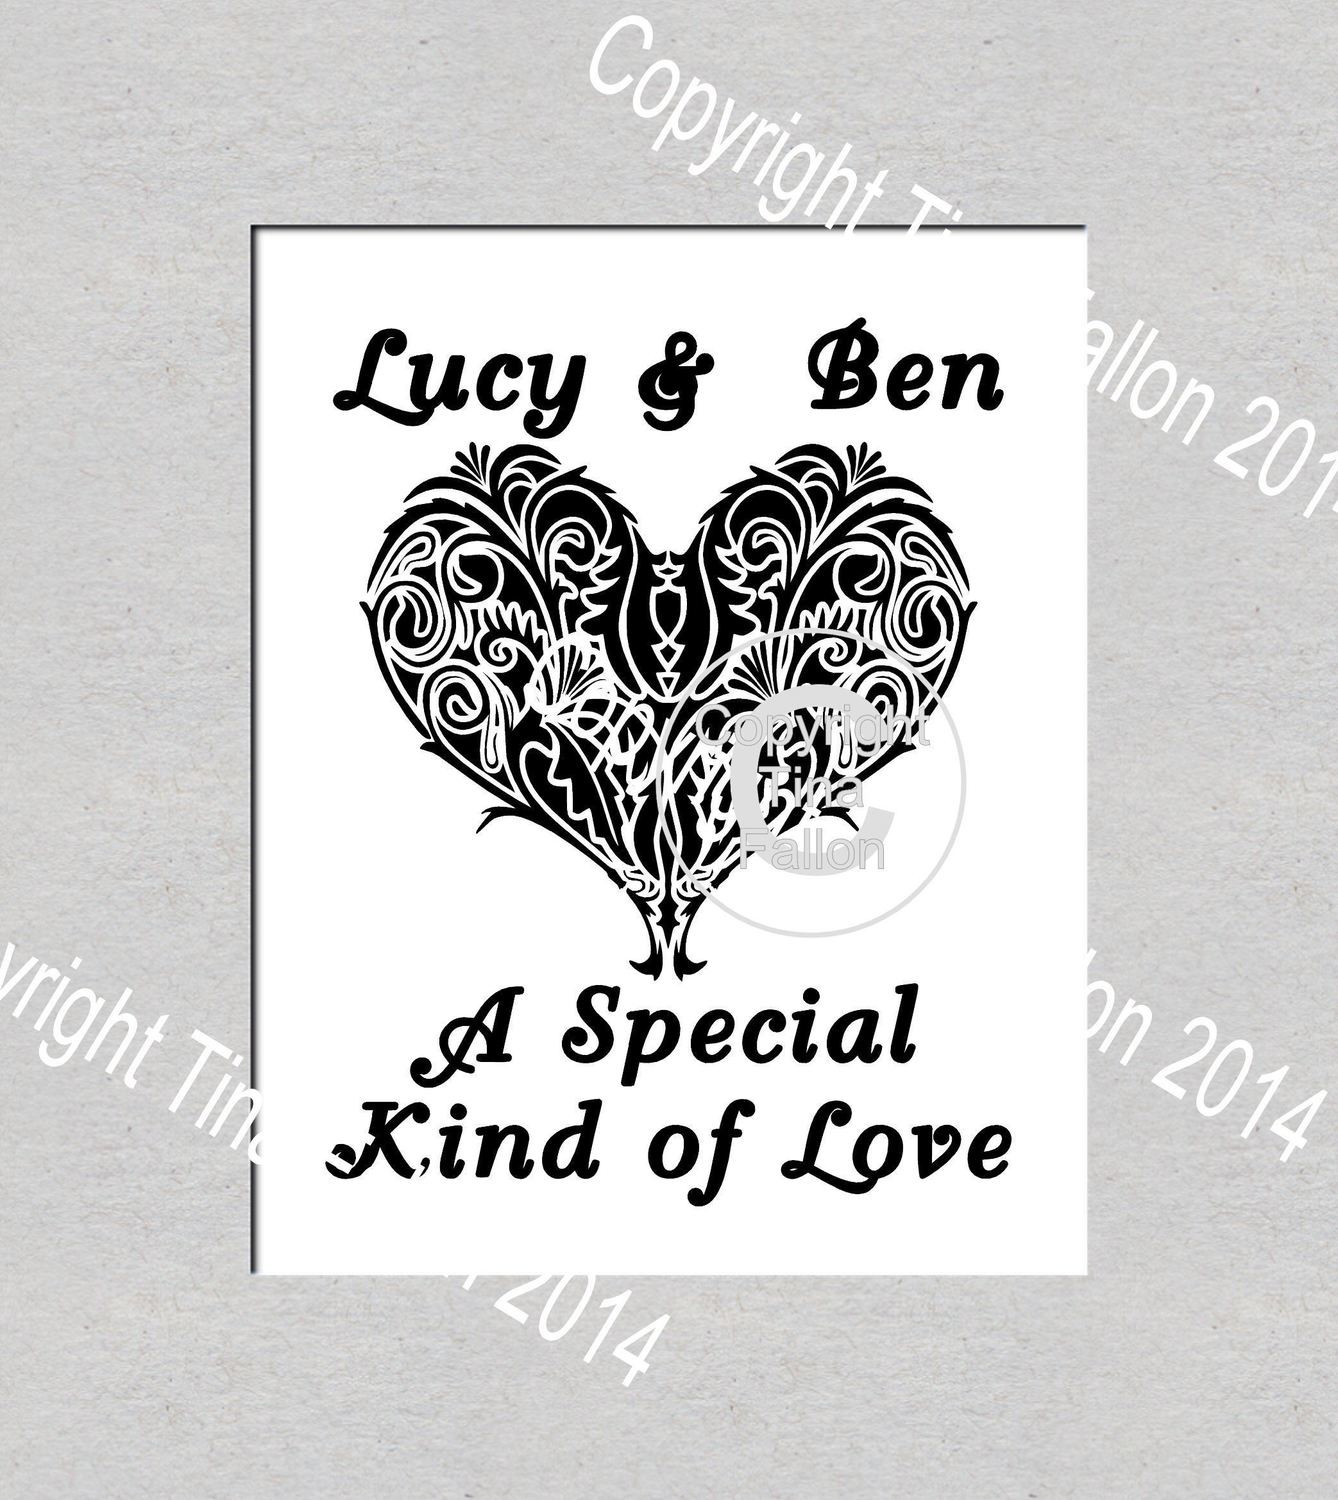 A Special Kind of Love, Vinyl Art Quote